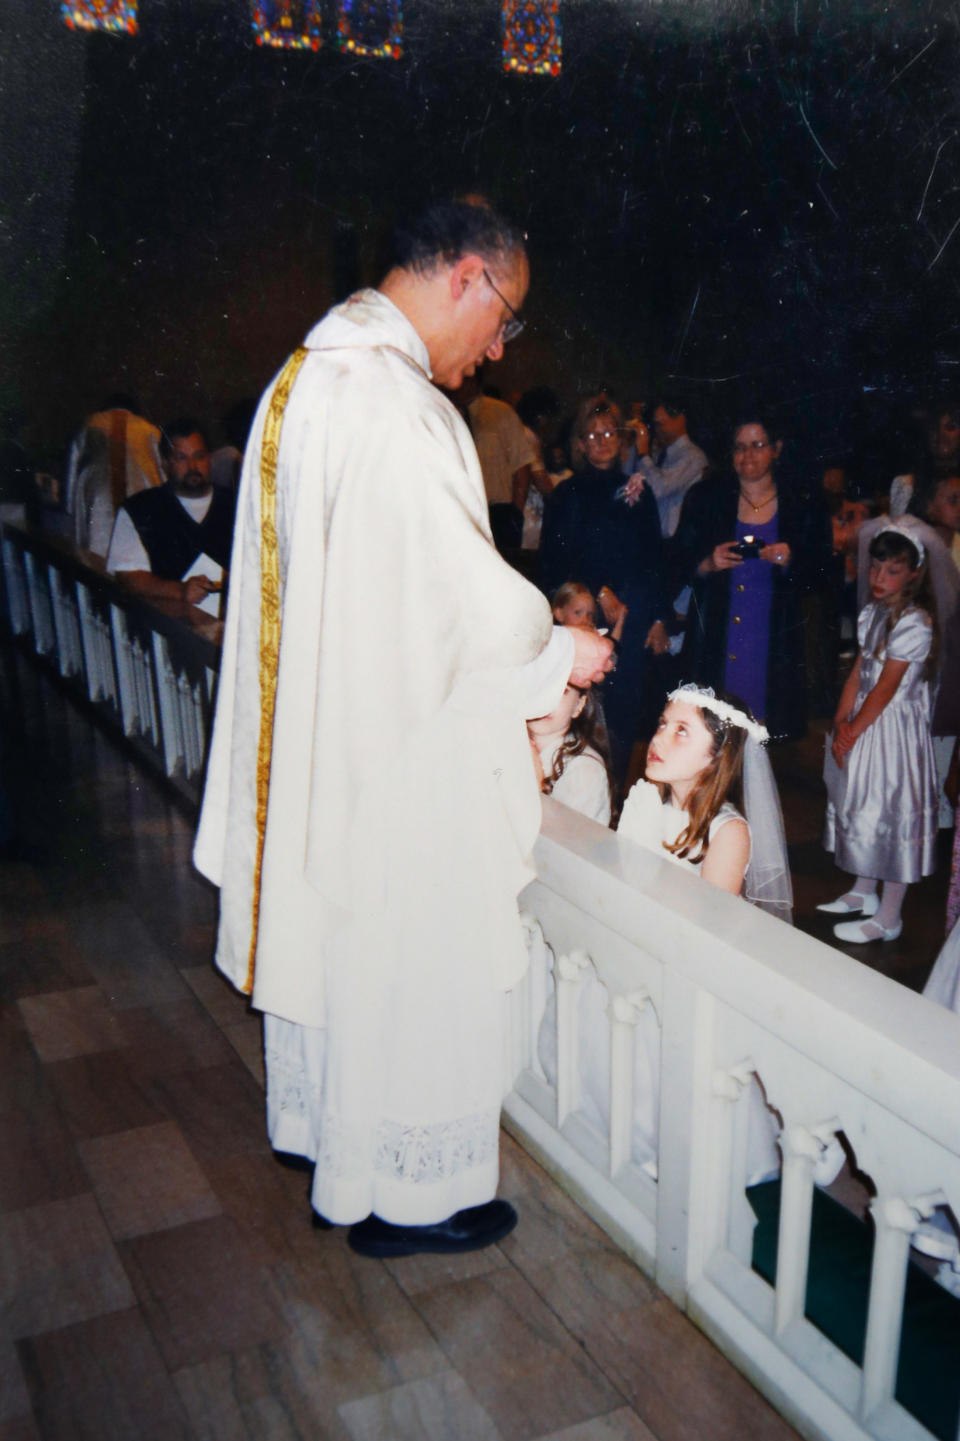 This undated photo provided by Mary Rose Maher shows her as a child during her First Dommunion with Father Eduard Perrone at The Assumption of the Blessed Virgin Mary Church in Detroit. For 25 years, the Rev. Eduard Perrone presided over the church, also known as Assumption Grotto. In July 2019, his parishioners were shocked when Perrone, 70, was removed from ministry after a church review board decided there was a “semblance of truth” to allegations that he abused a child decades ago. He told The Associated Press he “never would have done such a thing.” (Courtesy Mary Rose Maher via AP)